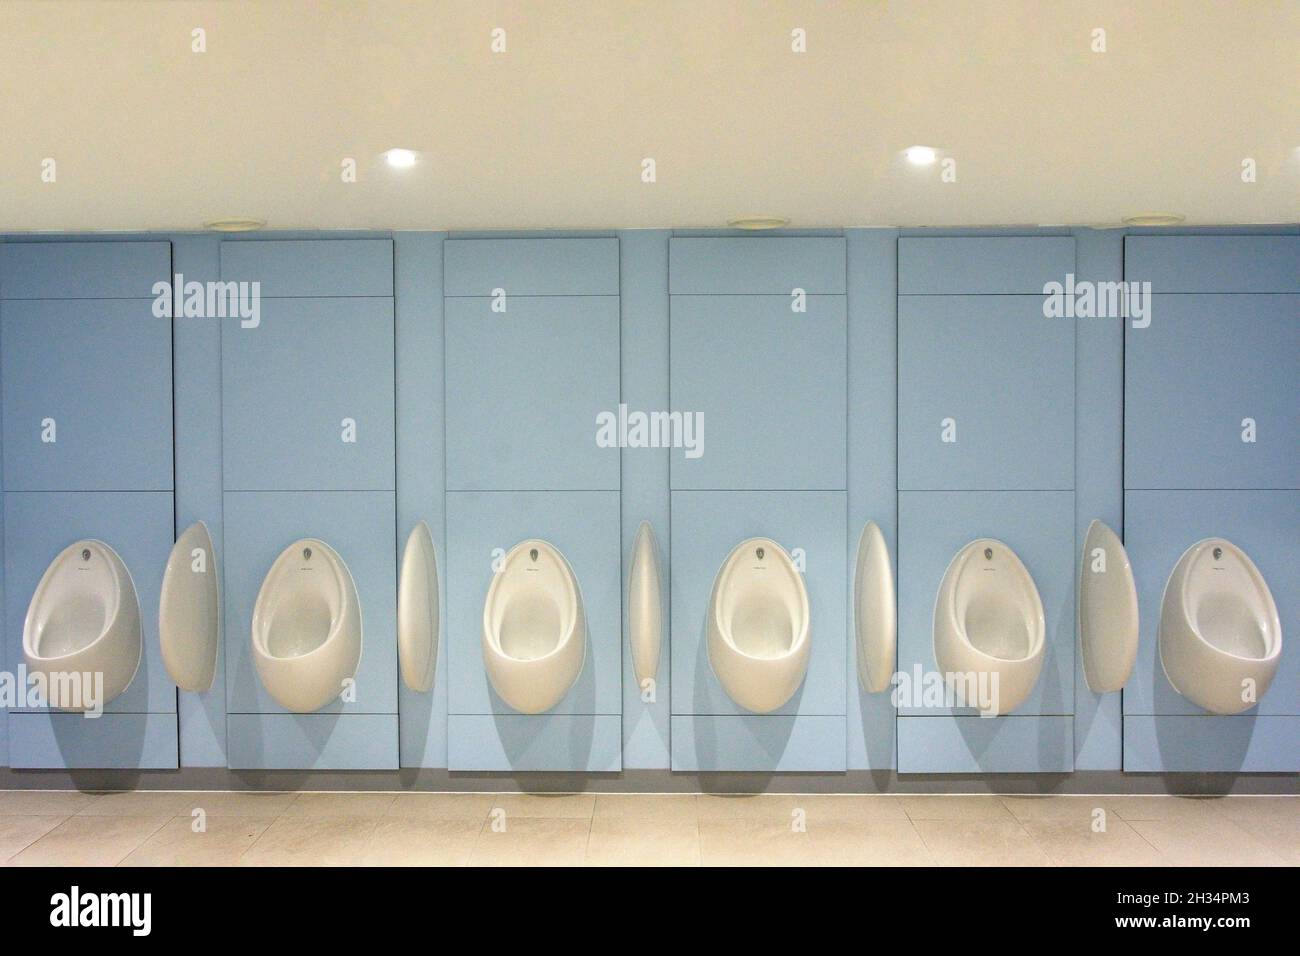 Urinals in men's toilet, The Avenue, The Lexicon Shopping Centre, Bracknell, Berkshire, England, United Kingdom Stock Photo